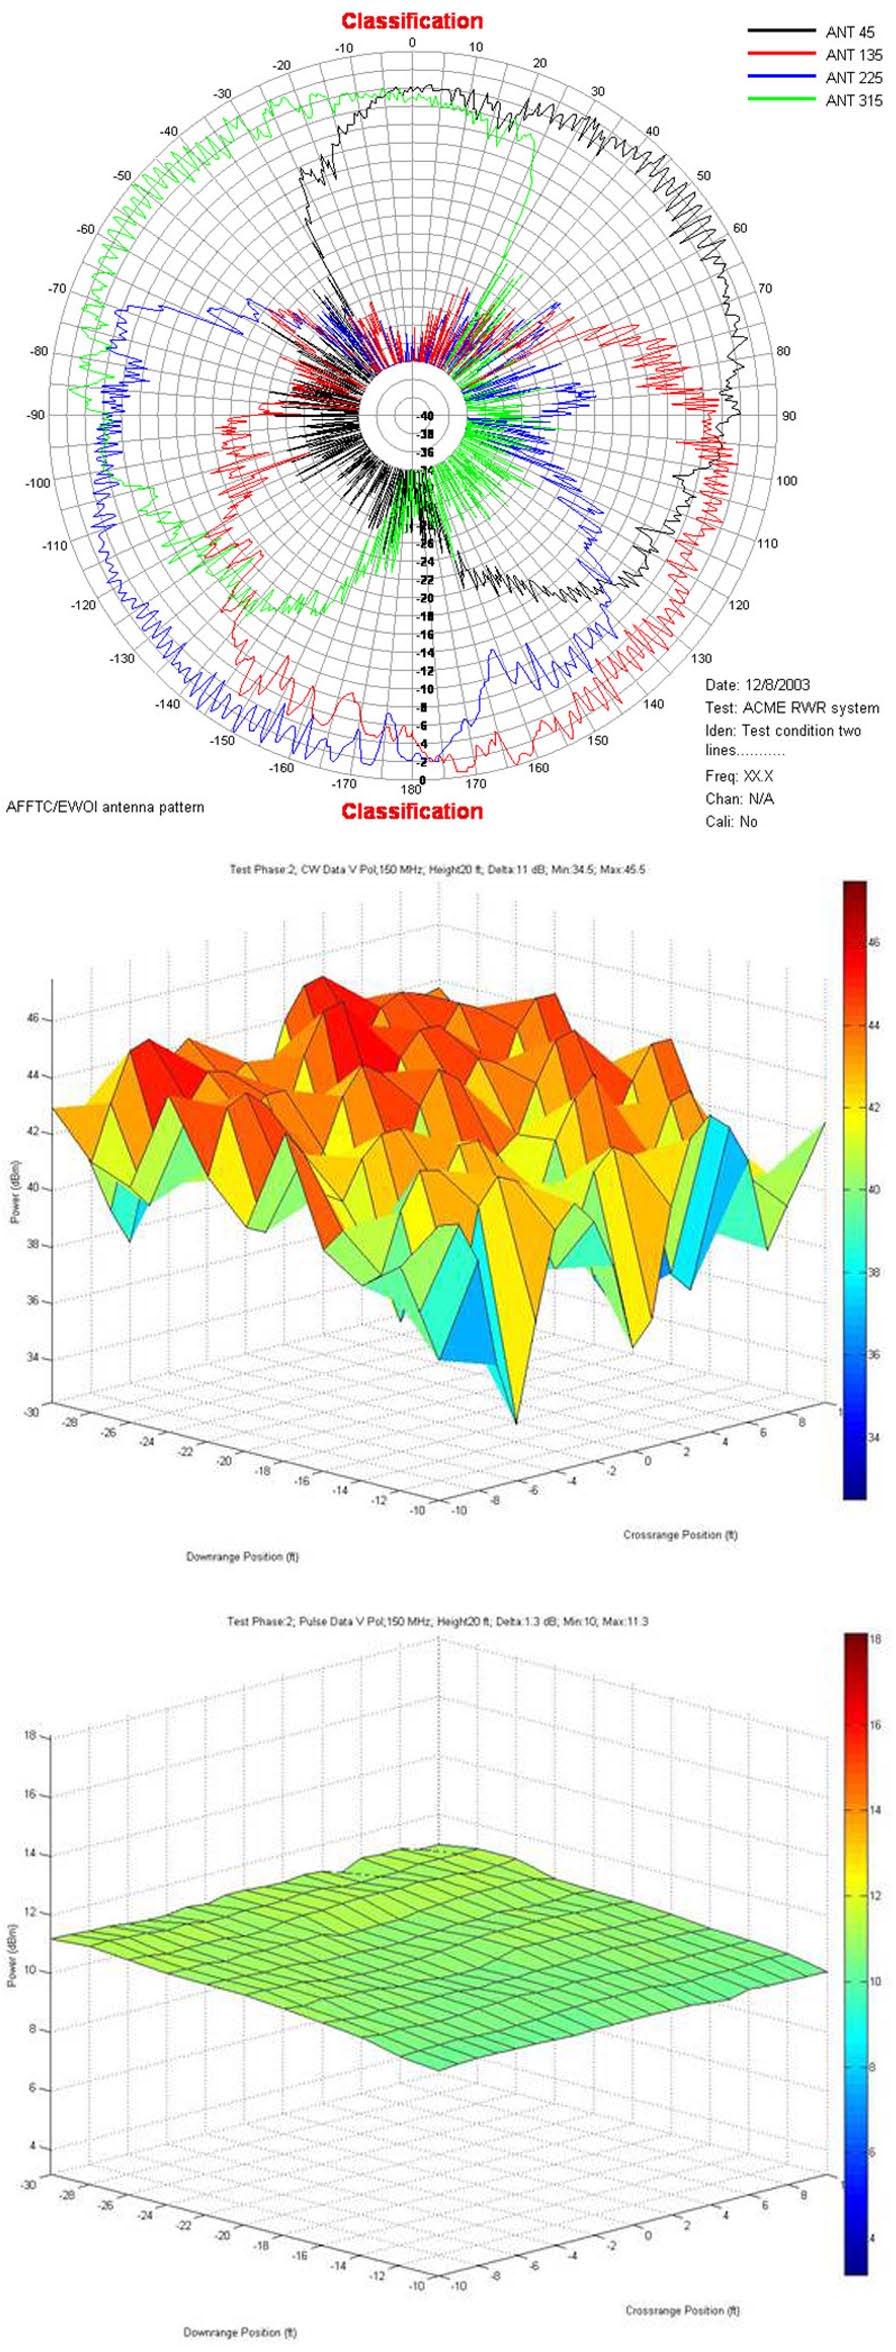 Sample antenna pattern data product from a BAF test.